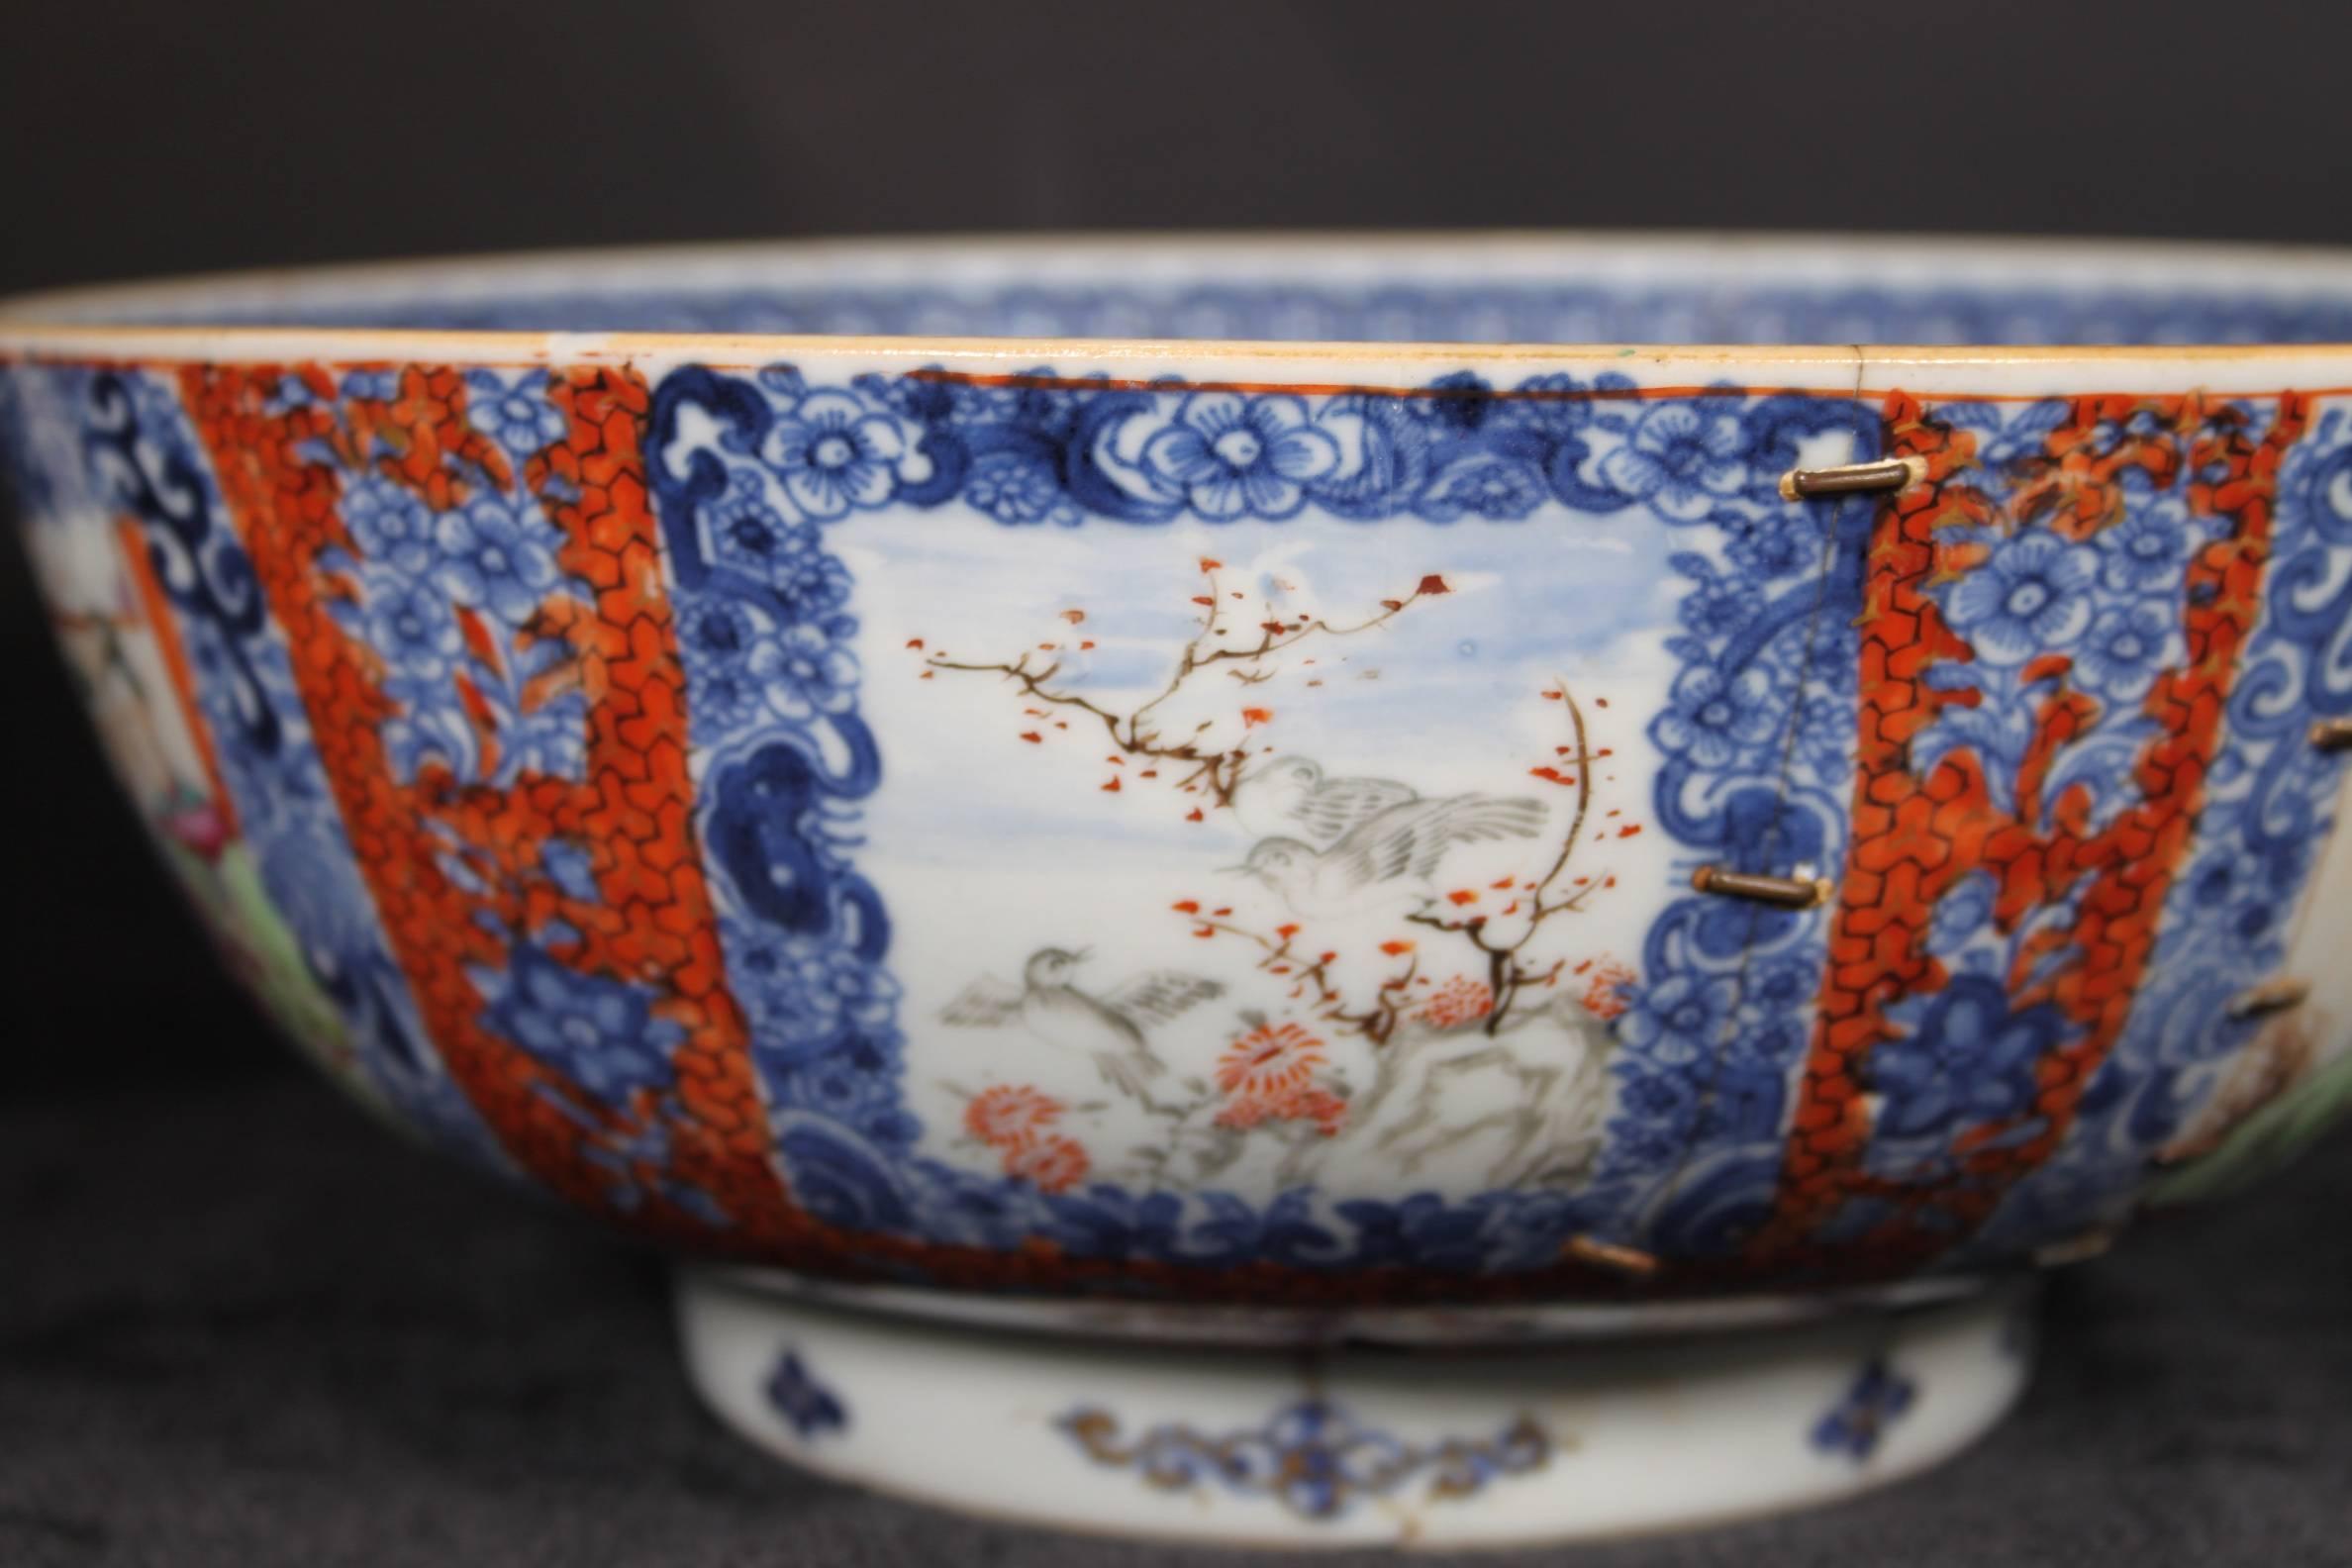 18th Century Qianlong Qing Dynasty Chinese Export Ware Porcelain Punch Bowl For Sale 2